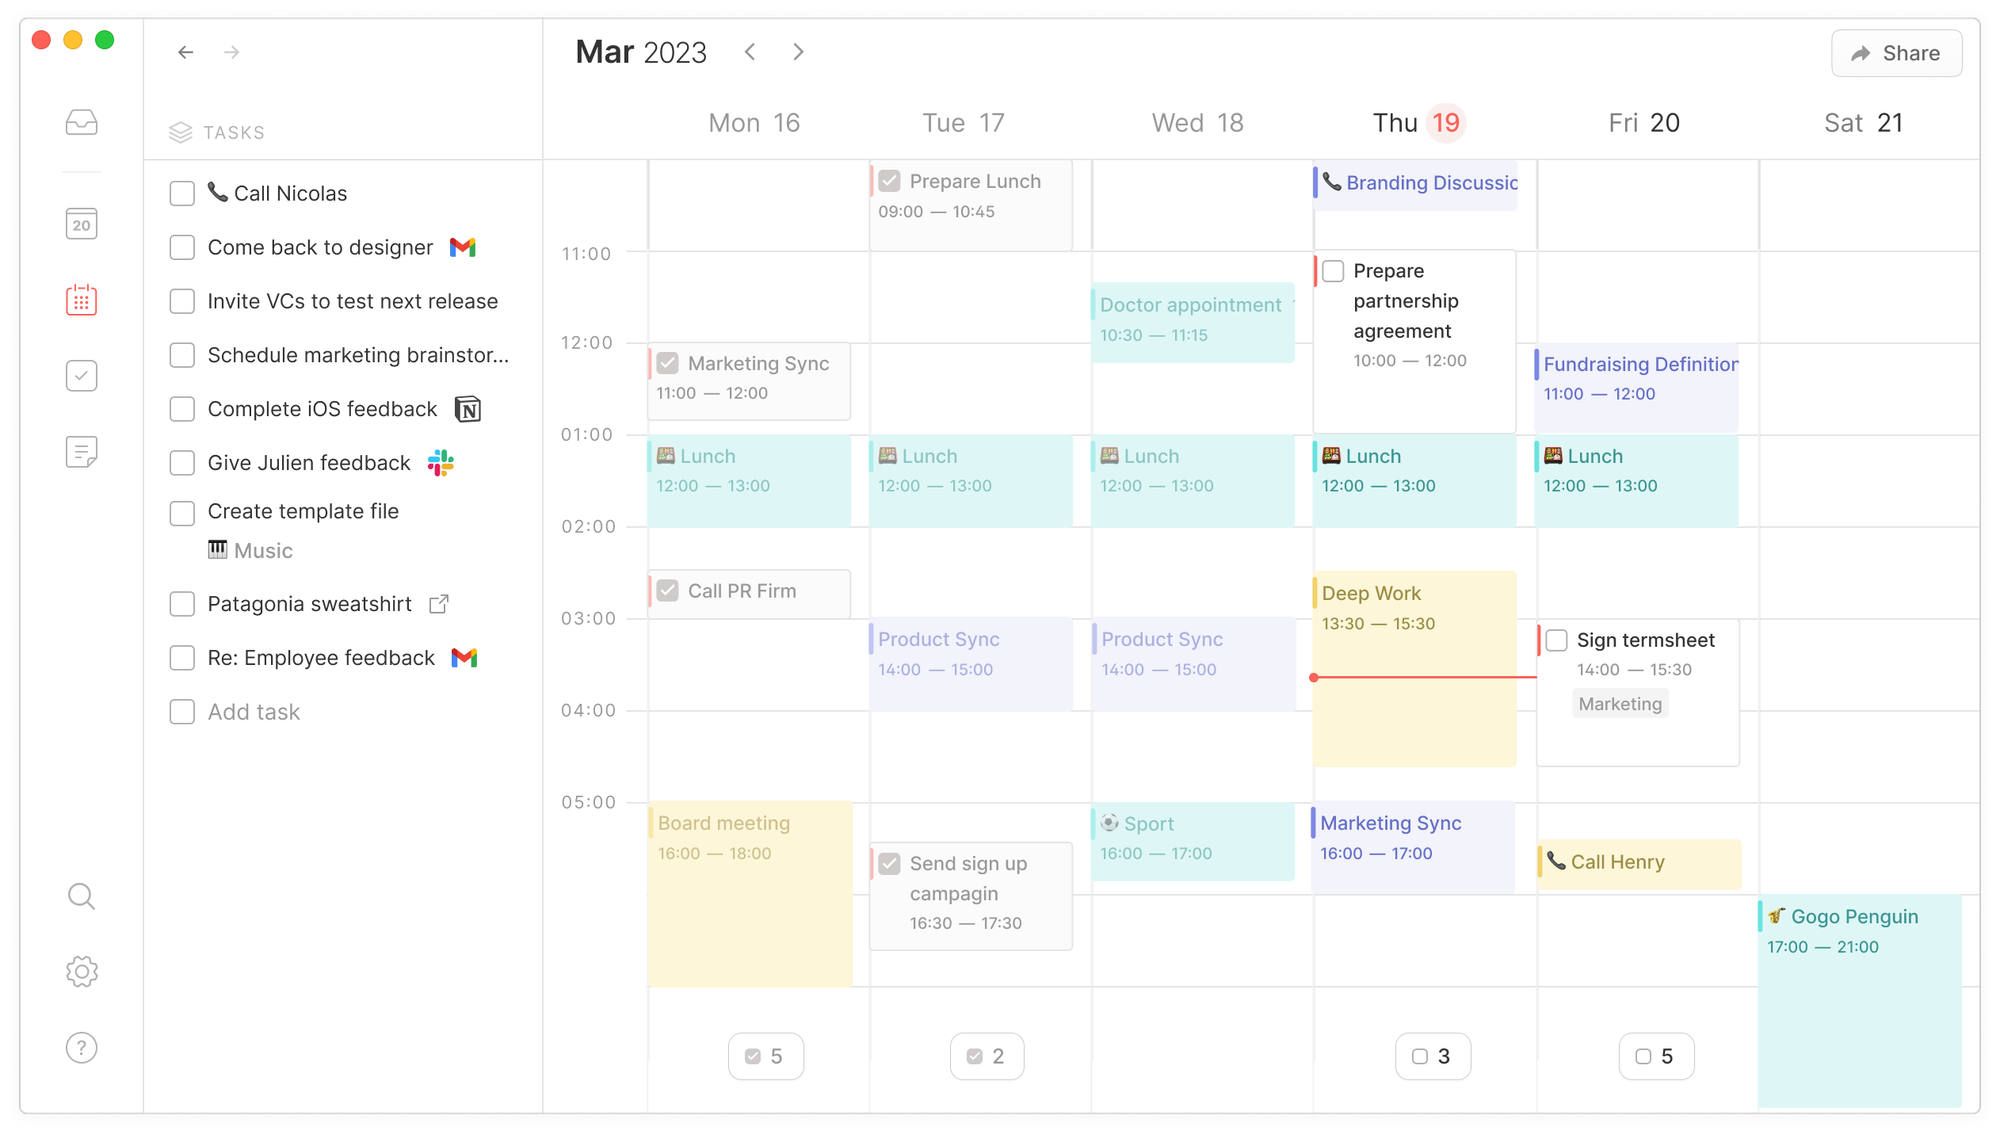 The Calendar screen with the tasks of the week